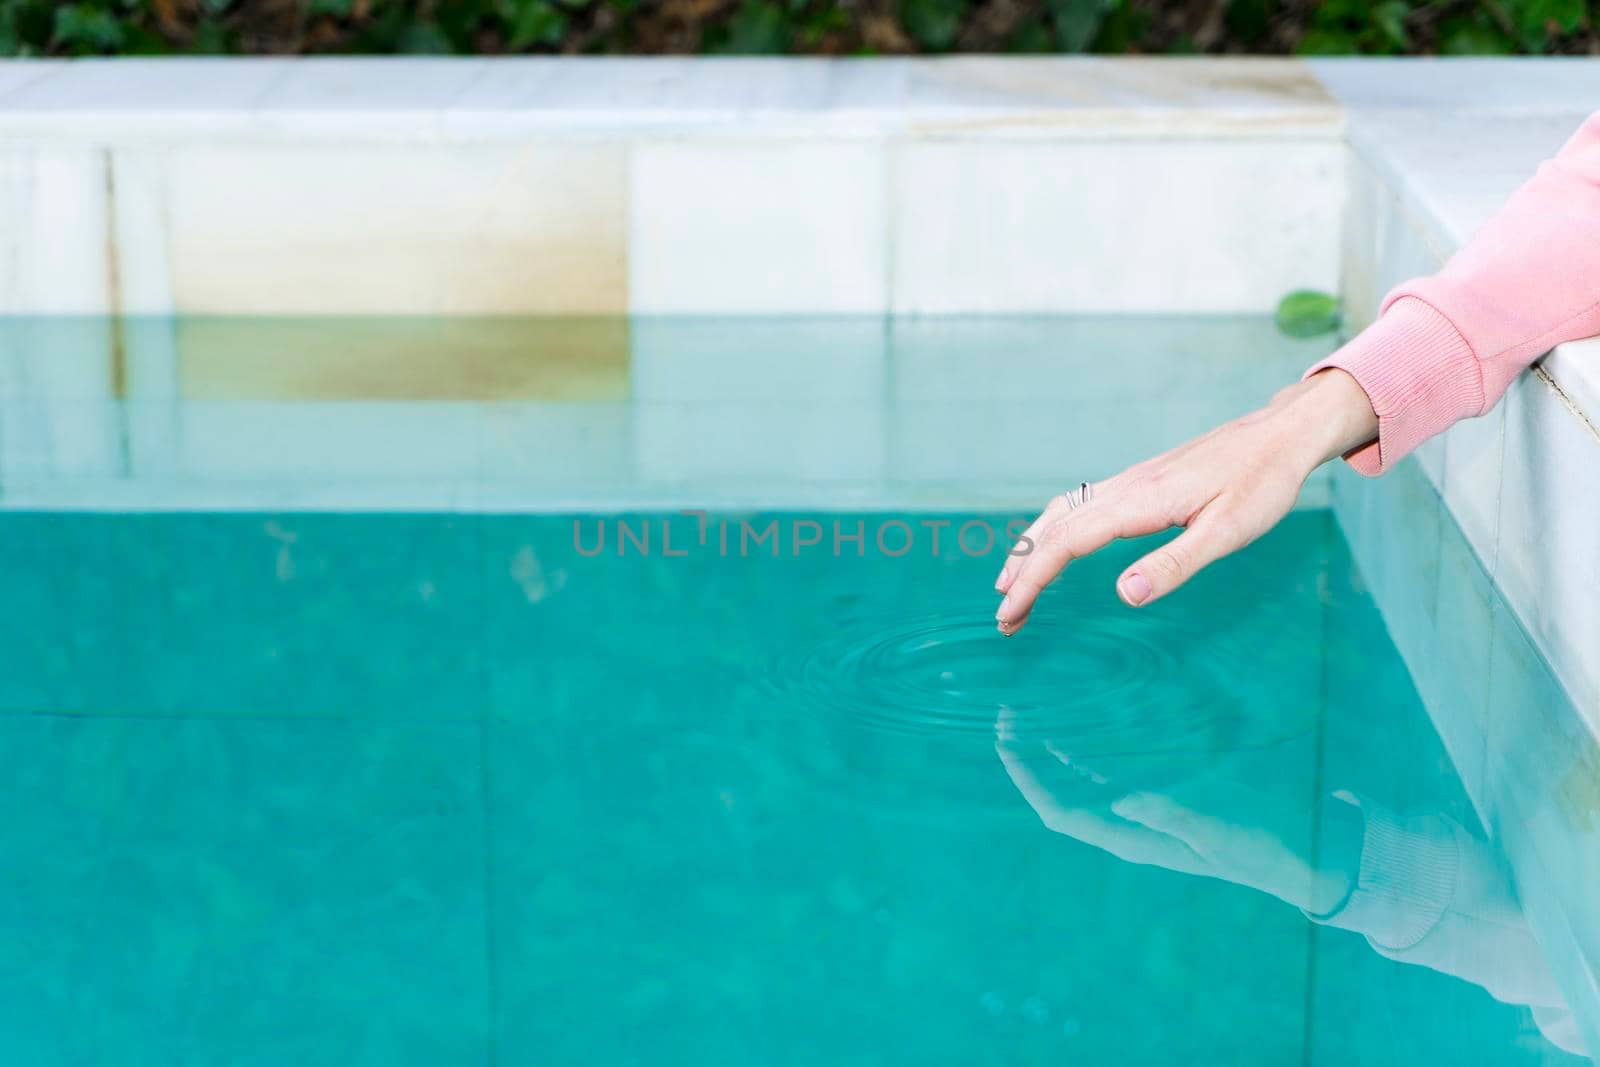 Young woman's hand delicately touching the surface of a turquoise-blue pool and generating a small ripple.